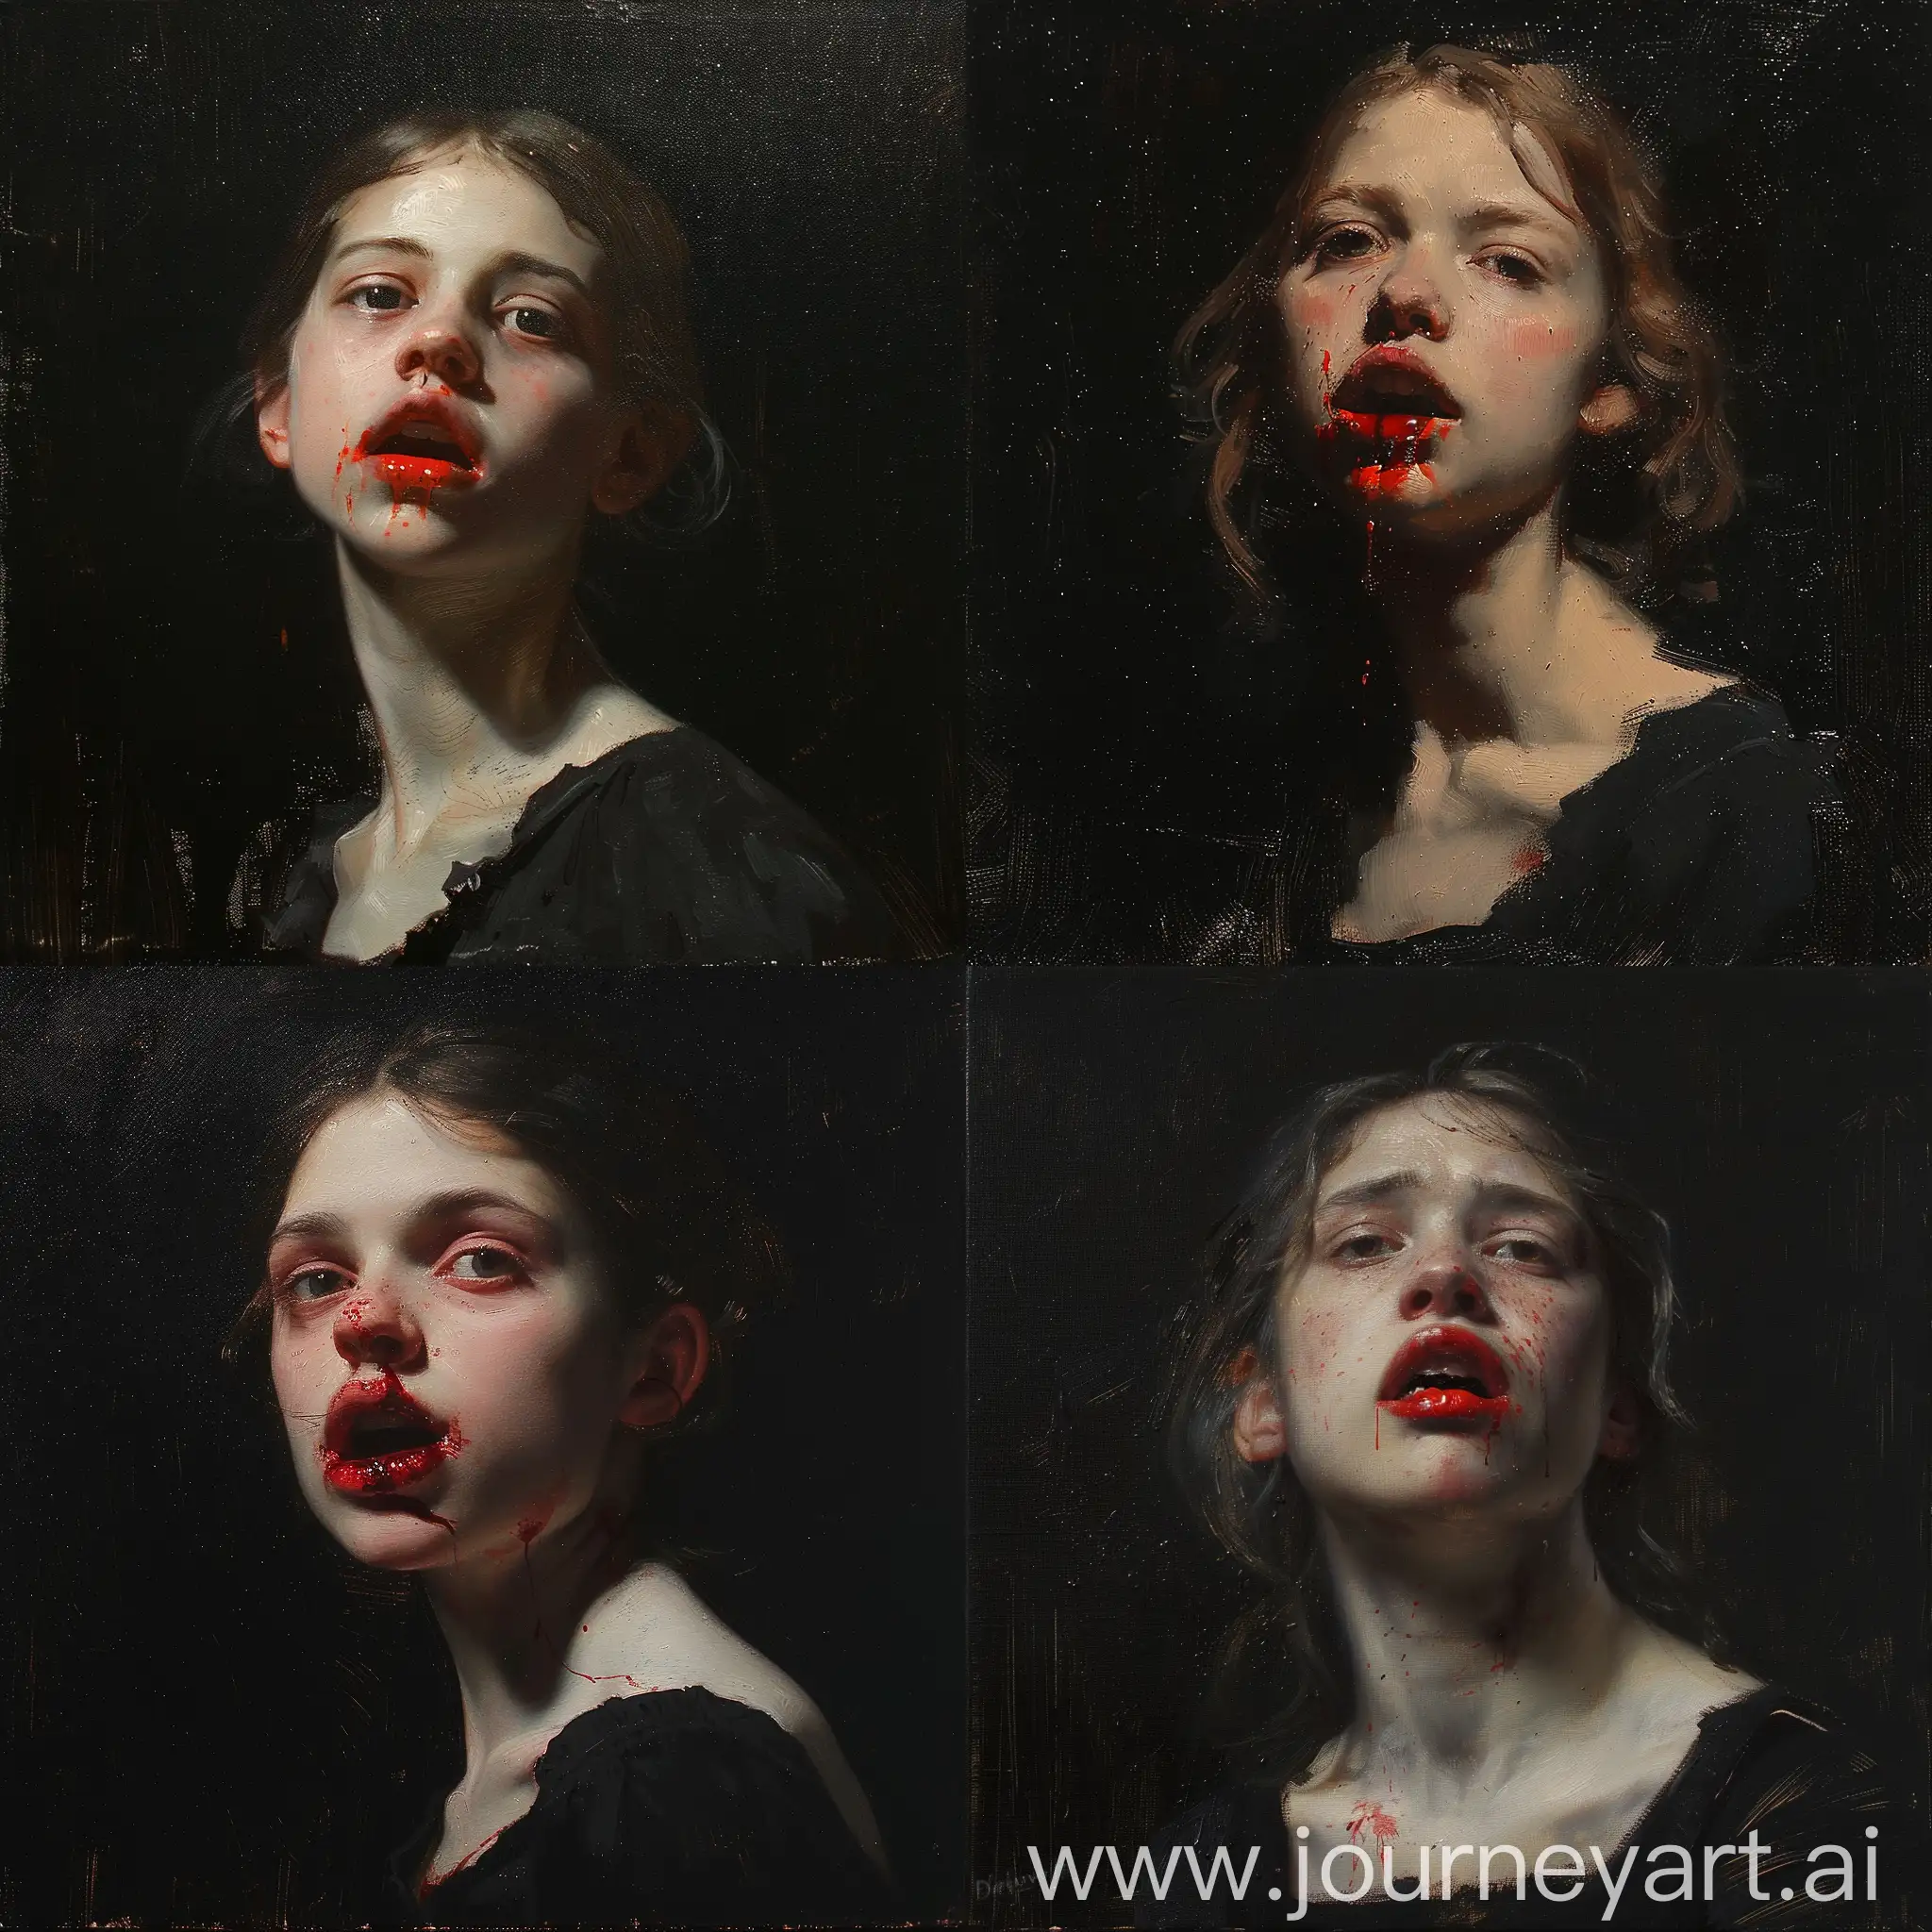 Dark painting of a young woman with bloody mouth by Frank Duveneck, Oil sketch, wlop John singer Sargent, jeremy lipkin and rob rey, range murata jeremy lipking, John singer Sargent, black background, jeremy lipkin, lensculture portrait awards, casey baugh and james jean, detailed realism in painting, award-winning portrait, amazingly detailed oil painting, brushstrokes, Sean cheetham, details, well painted, good colors, strong shadows, black background